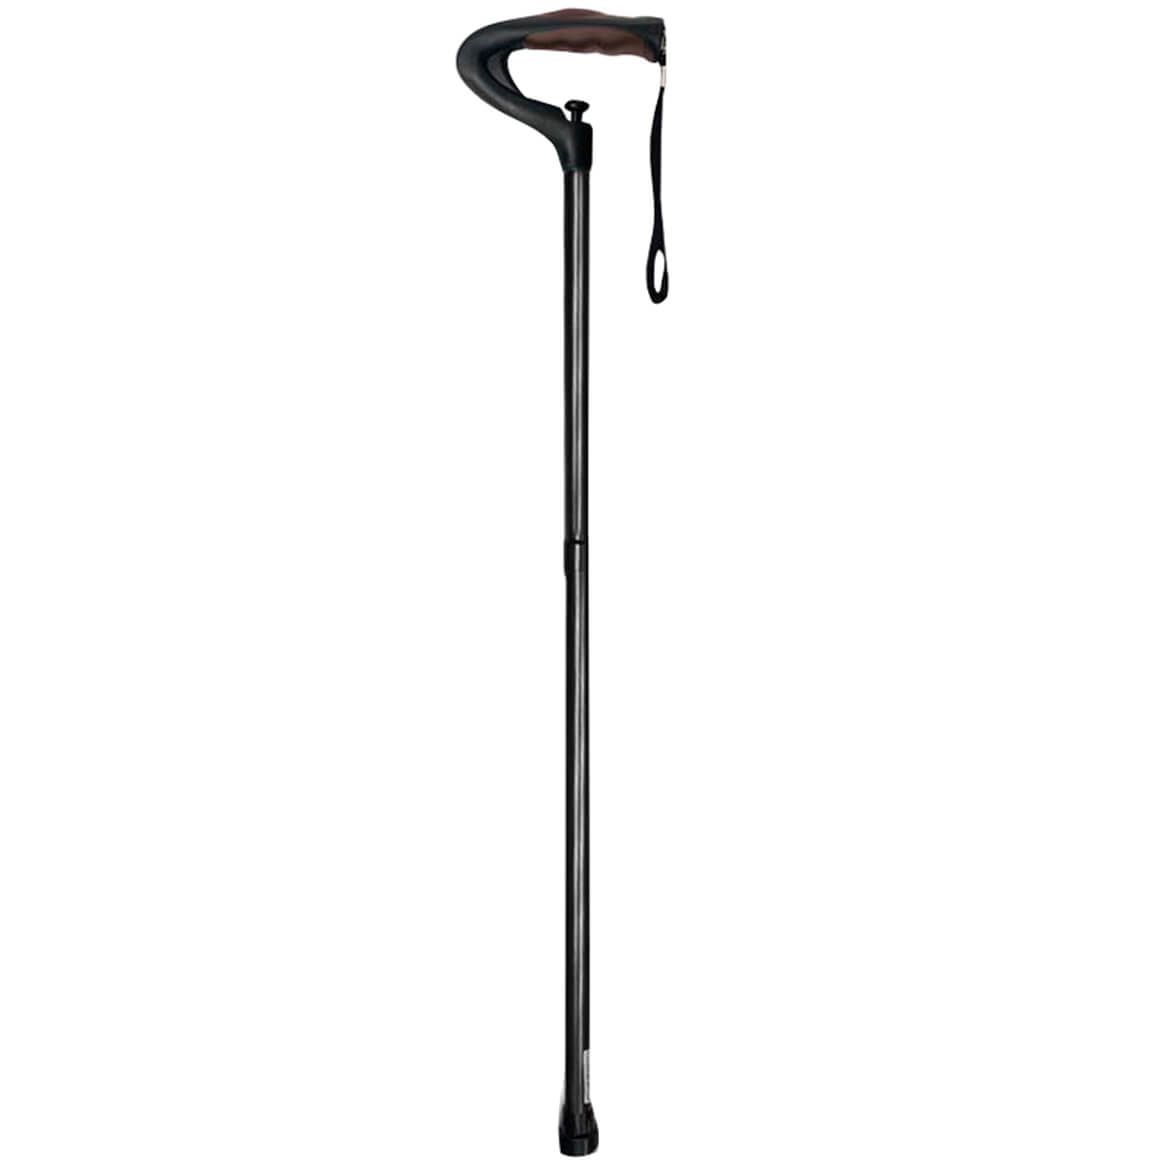 One-Push Button Cane + '-' + 371602